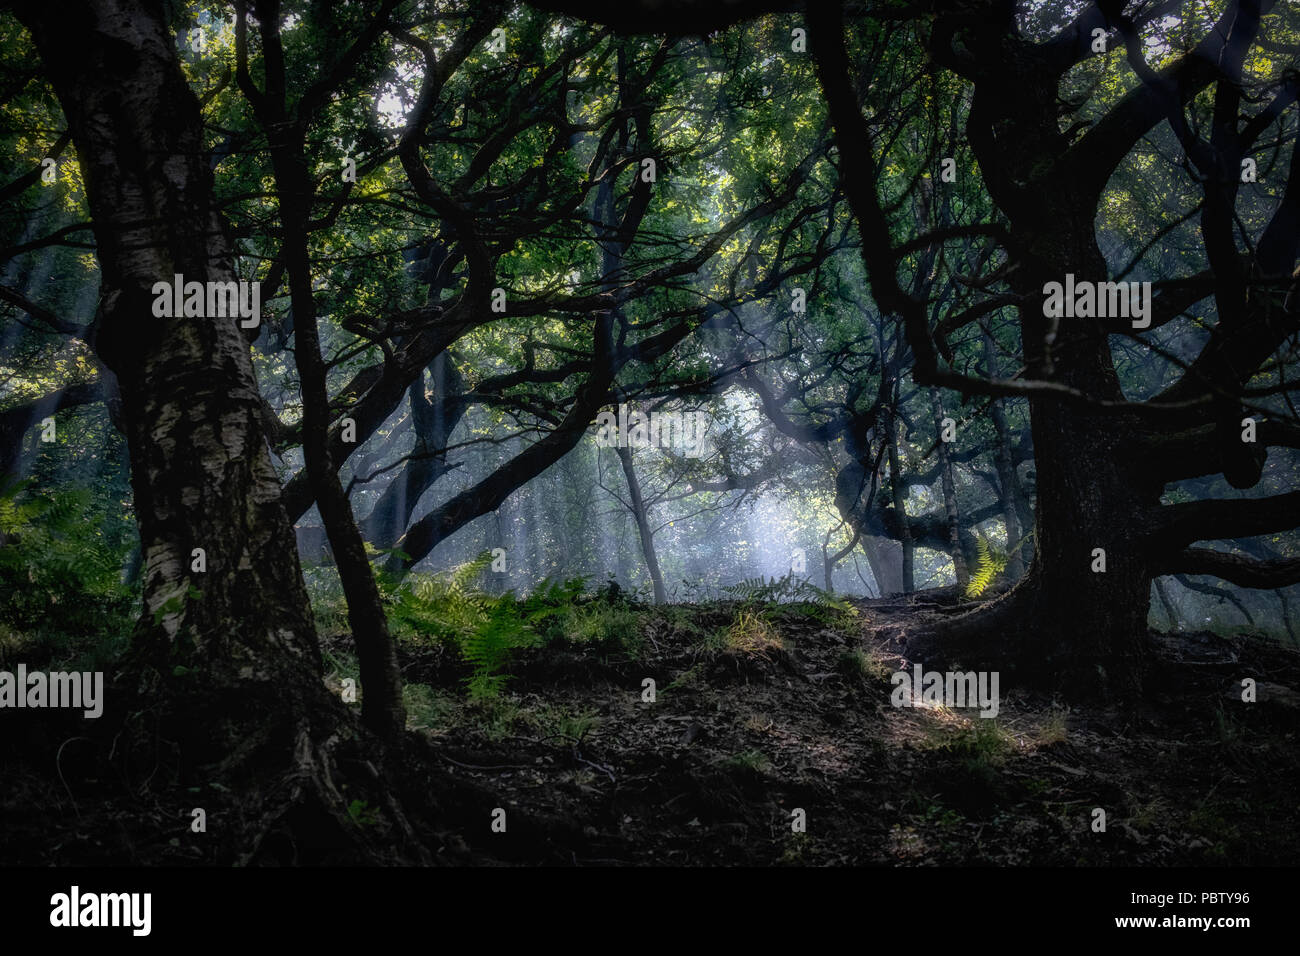 Strong atmospheric concept images taken against a strong sun filtering through the trees with distinct sun rays lighting the trees and woodlands Stock Photo